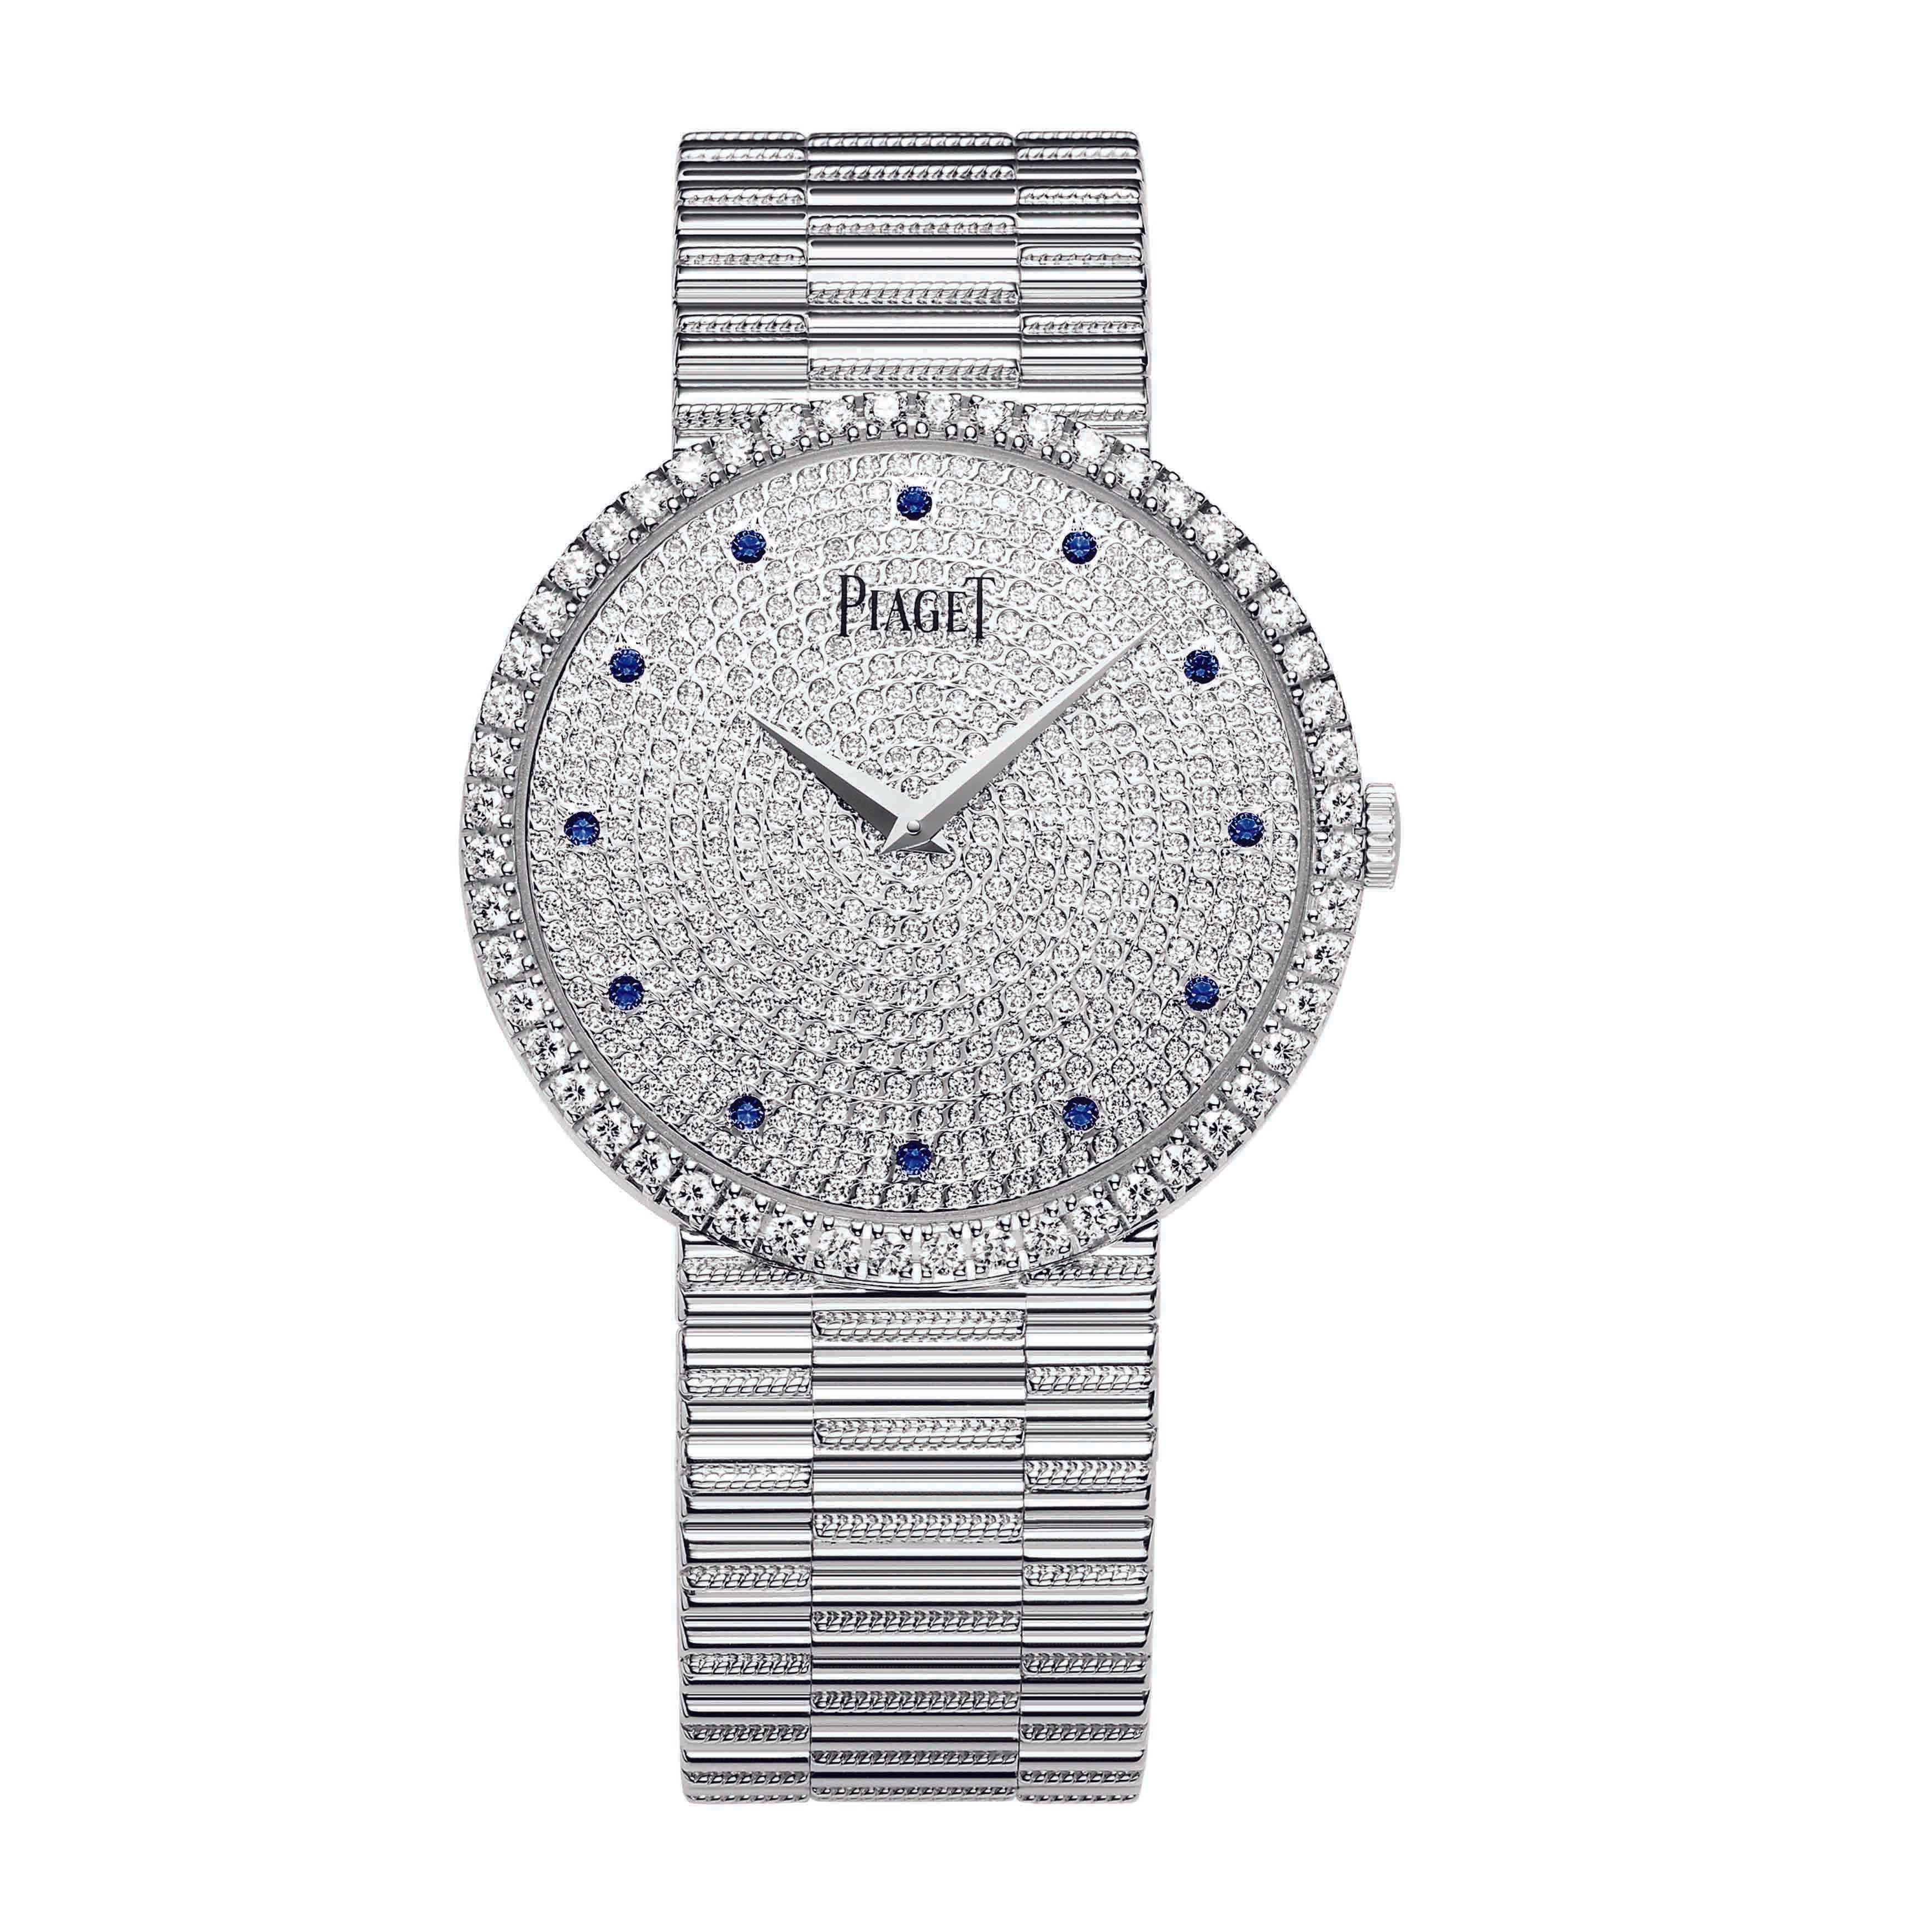 Piaget Altiplano Traditional Watch, 34mm Pave Diamond Dial, G0A37047